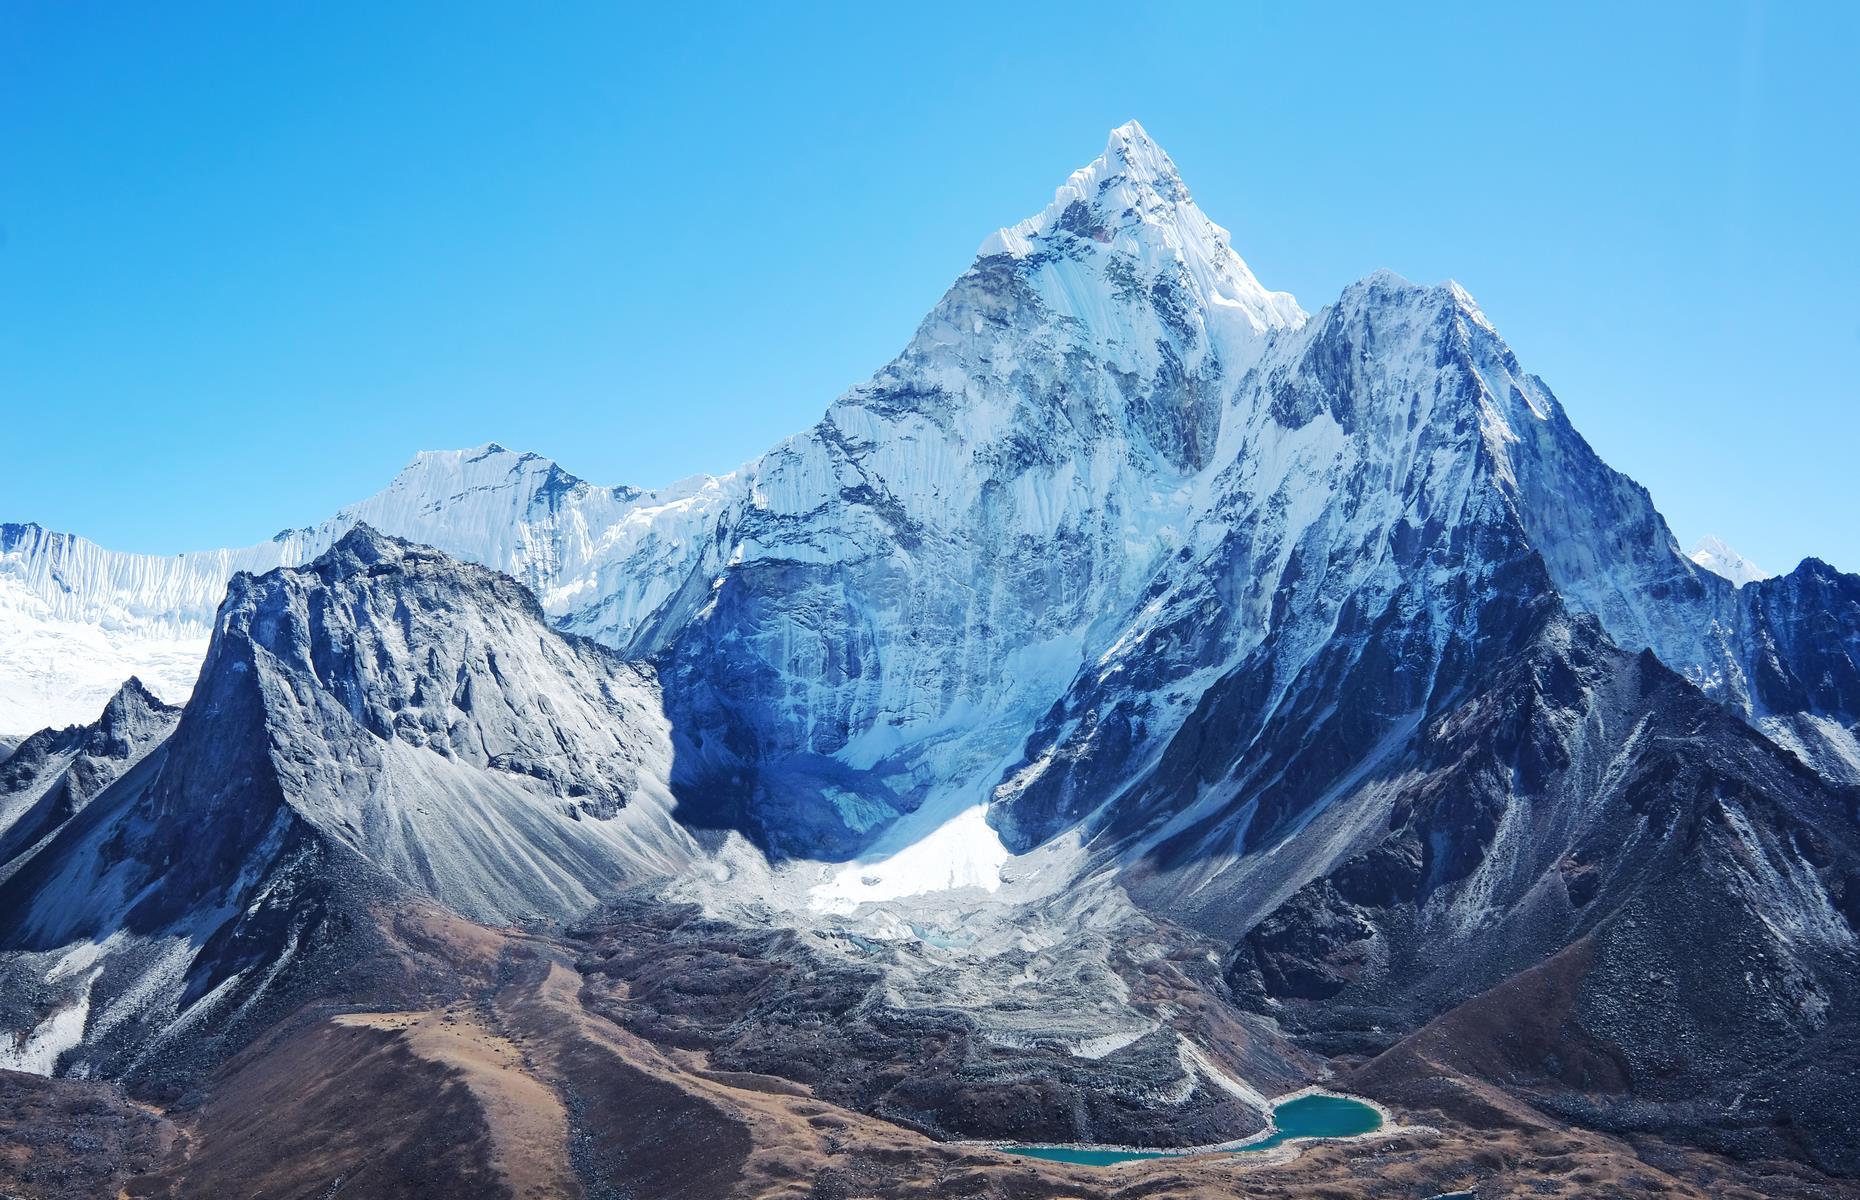 <p>Probably best-known as the set for the 2015 action movie <em>Everest</em>, the world's tallest mountain range is also one of the finest. Located in Nepal, Mount Everest soars up more than 29,000 feet (8,849m) and typically attracts tens of thousands of visitors every year. Interestingly, <em>Everest</em>, which starred Jake Gyllenhaal, Josh Brolin and Keira Knightley, was partly filmed at the mountain's famous Base Camp, but many scenes were actually filmed at Cinecitta Studios in Rome.</p>